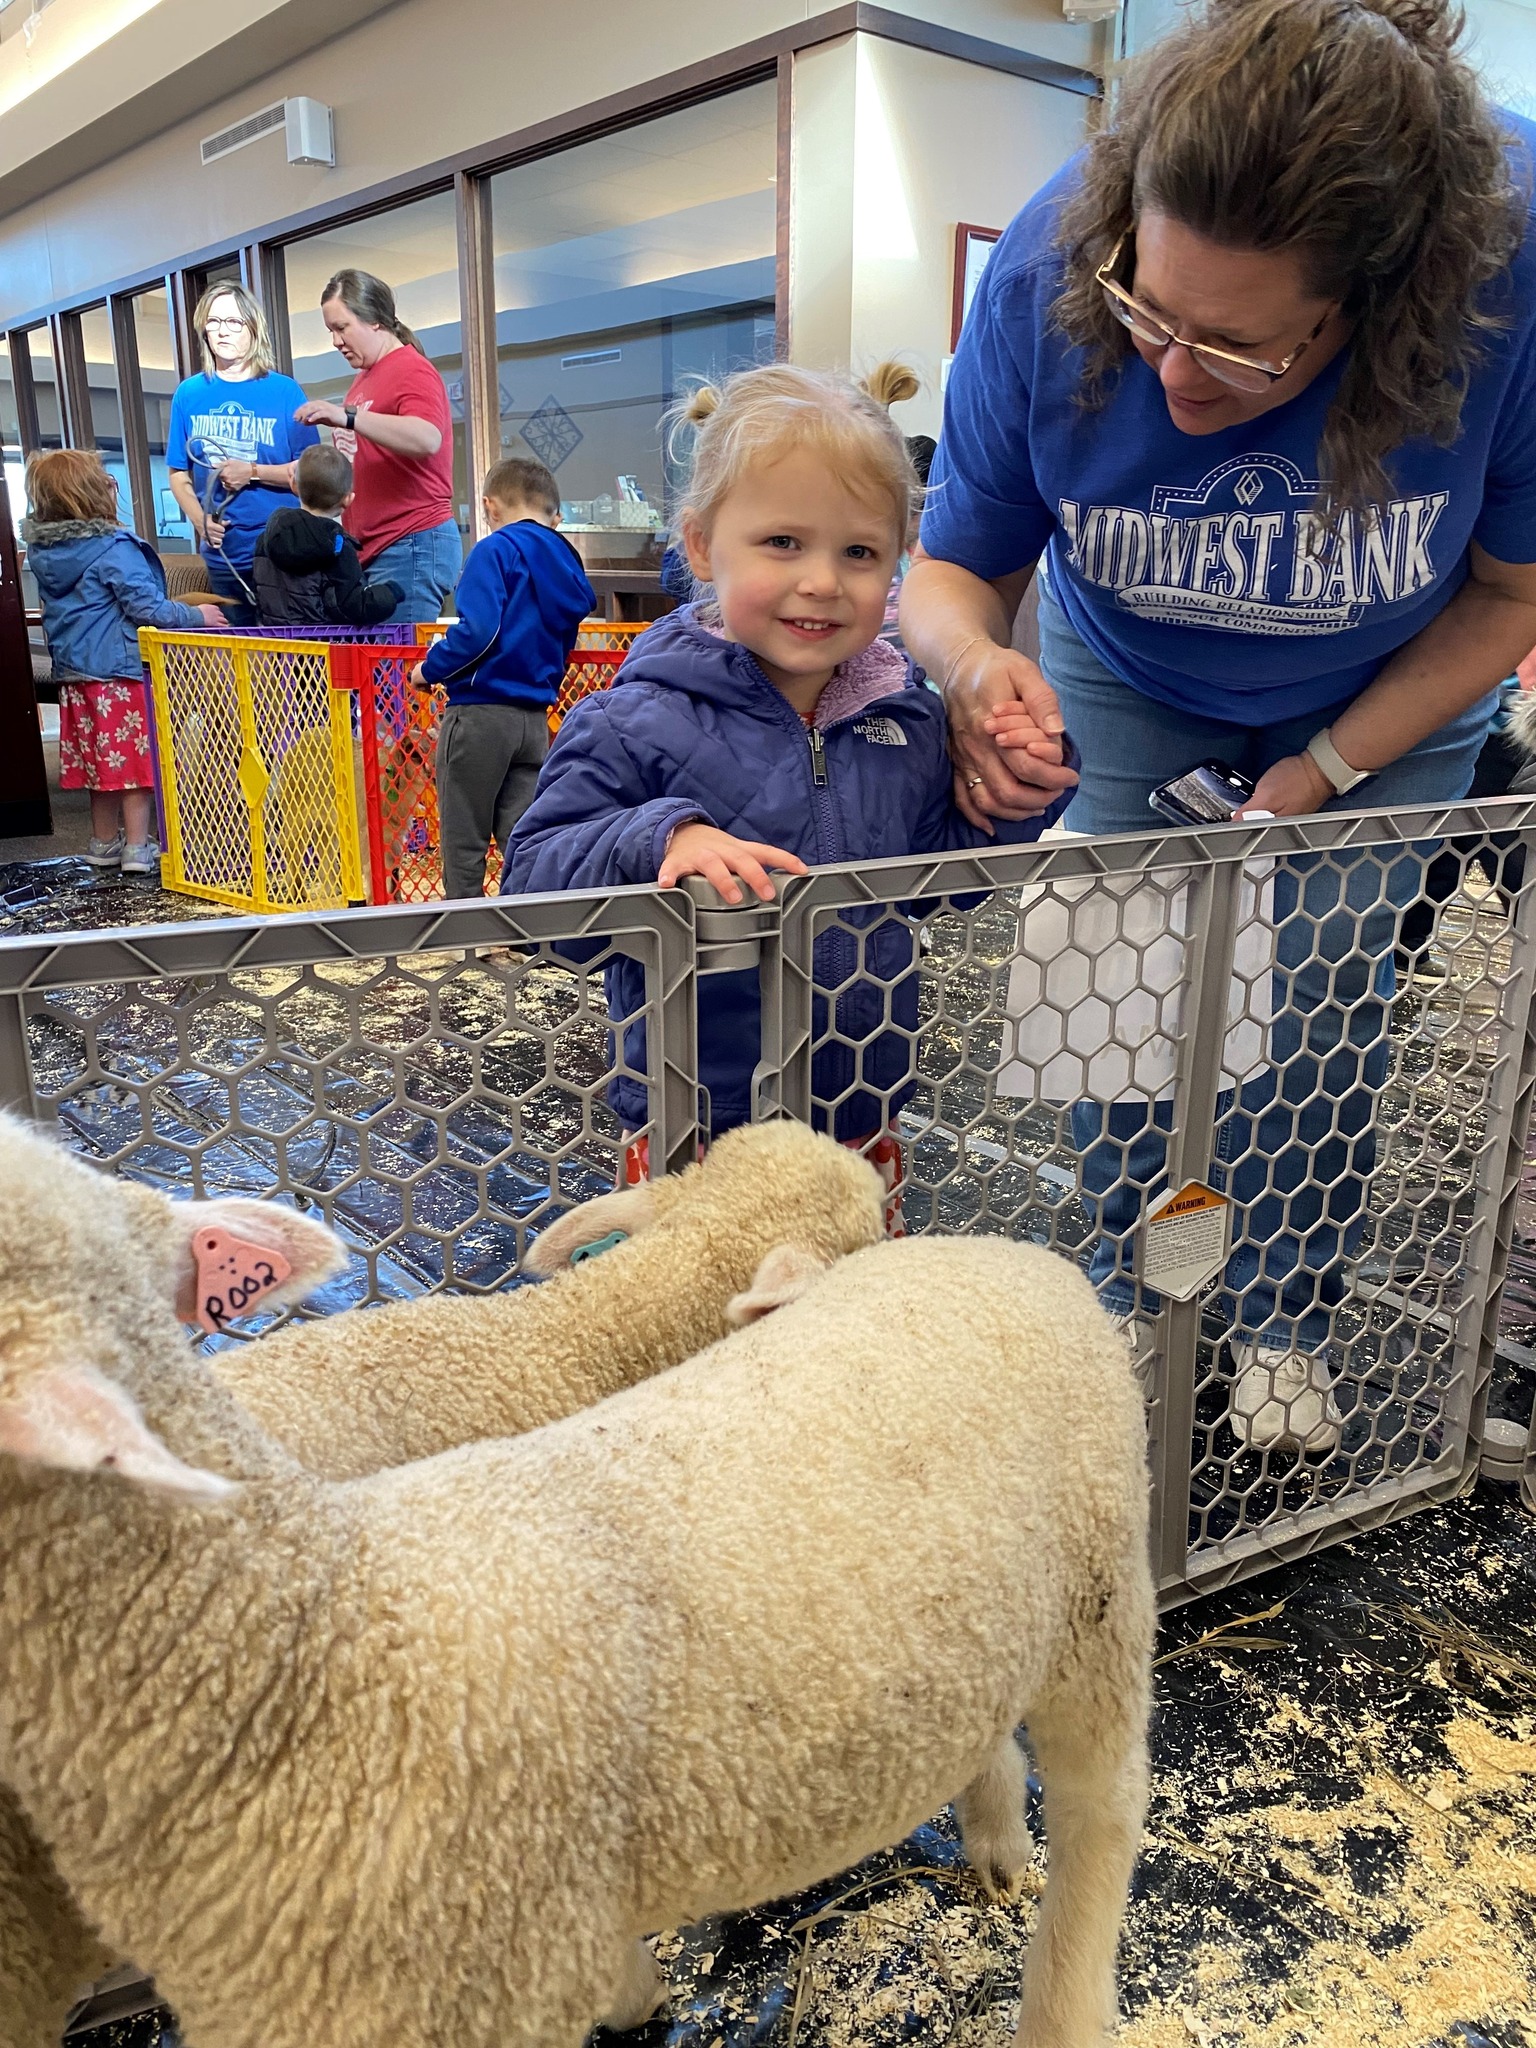 Our Pierce branch held their annual Petting Zoo this morning to commemorate #NationalFarmAnimalsDay. They had goats, lambs, bunnies, a dog, a pot-bellied pig, baby chicks and a Highland calf! Local daycares and students from Pierce and Zion Elementary School visited and left with animal-shaped fruit snacks.